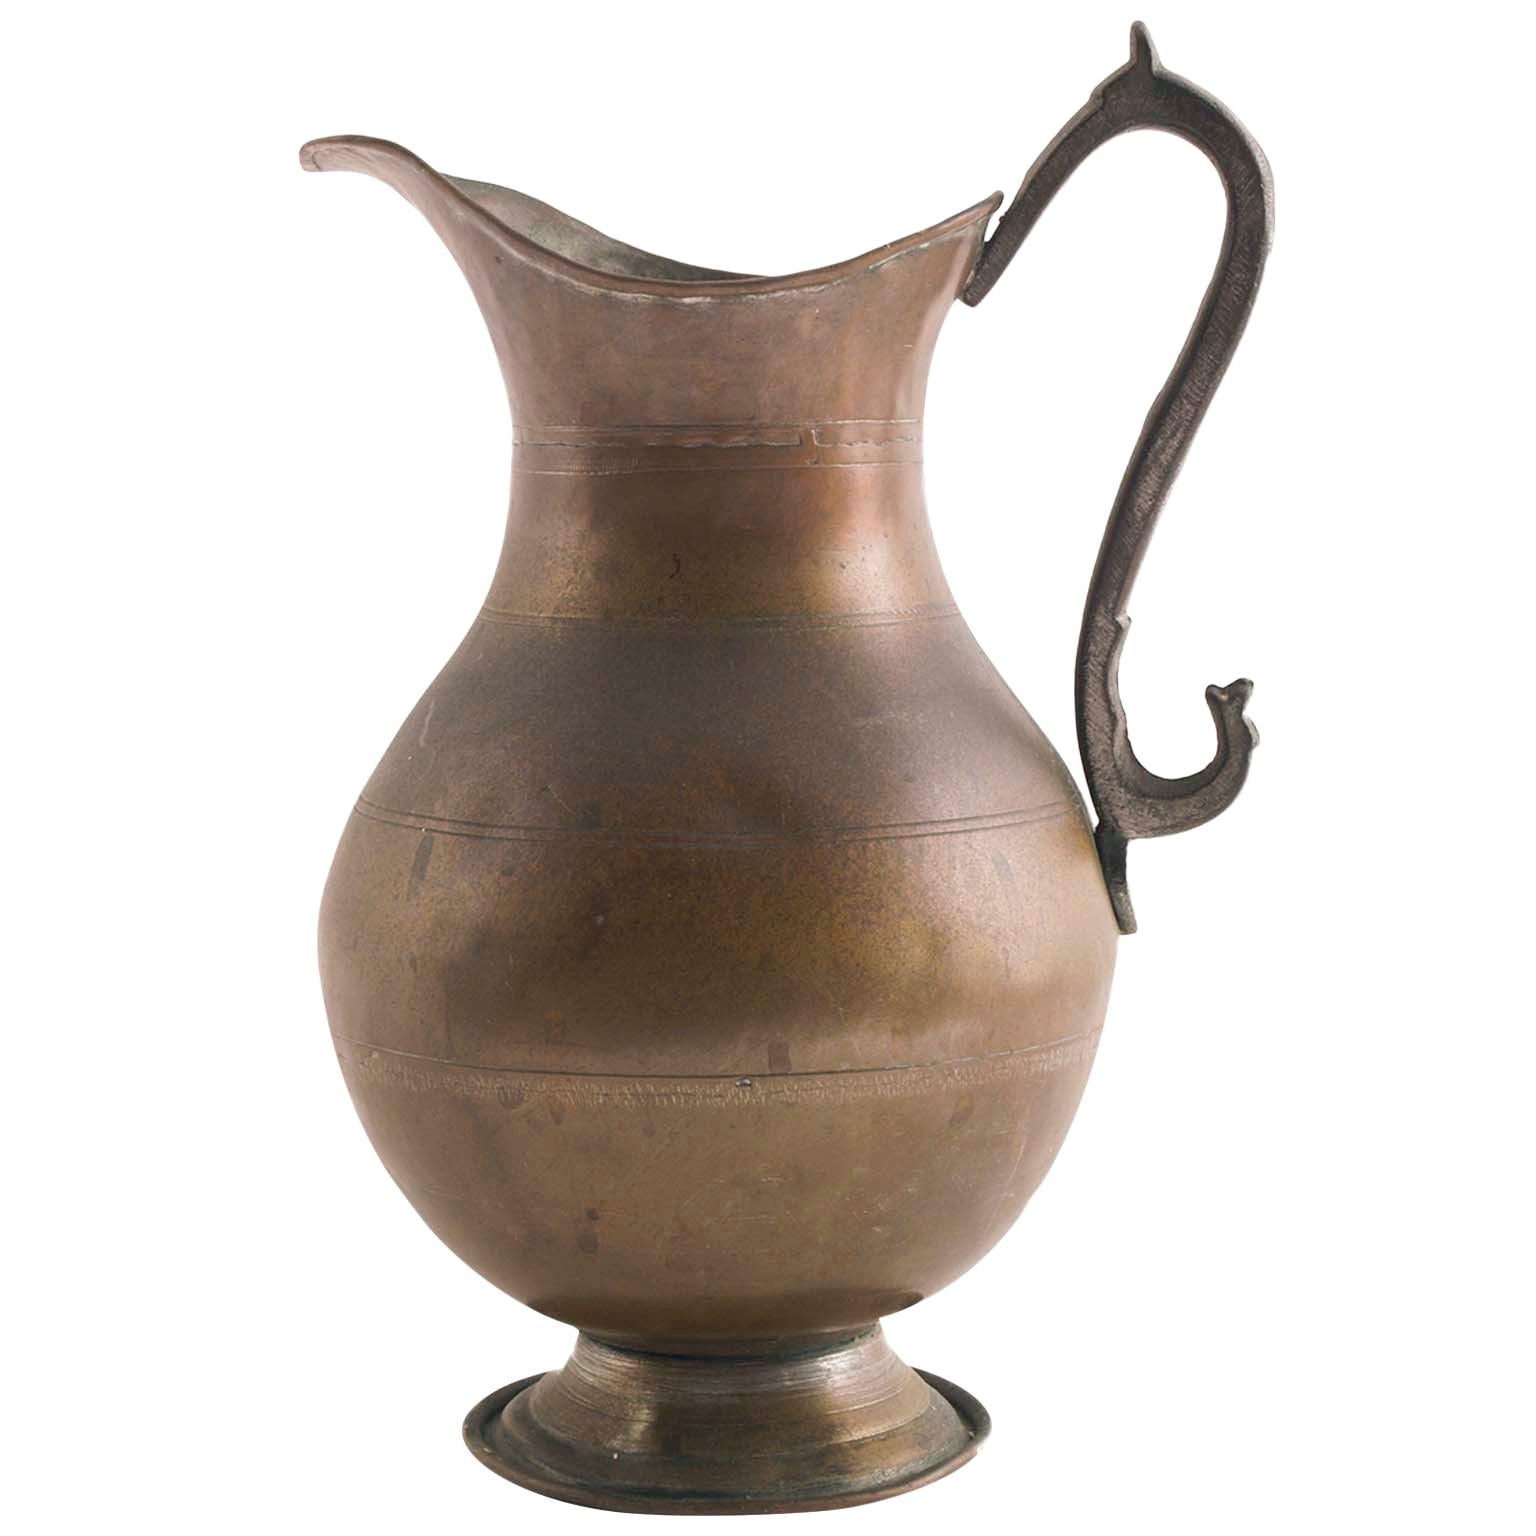 Antique Water Jug or Pitcher, from the Ottoman Empire, Handmade in Heavy Copper